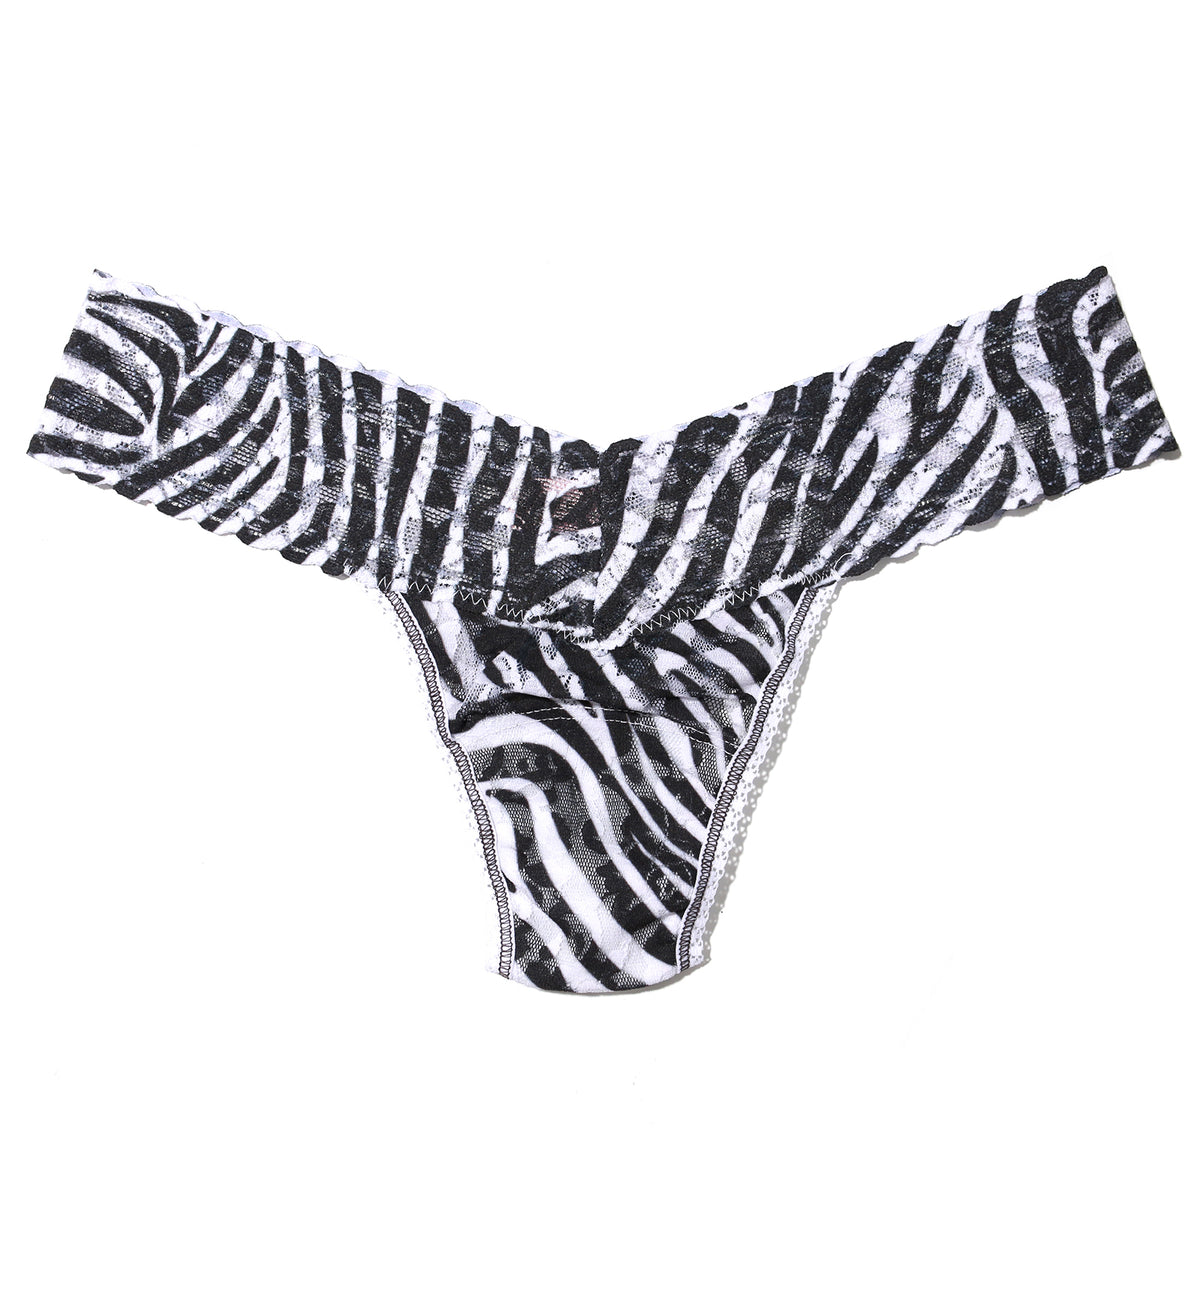 Hanky Panky Signature Lace Printed Low Rise Thong (PR4911P),A to Zebra - A to Zebra,One Size